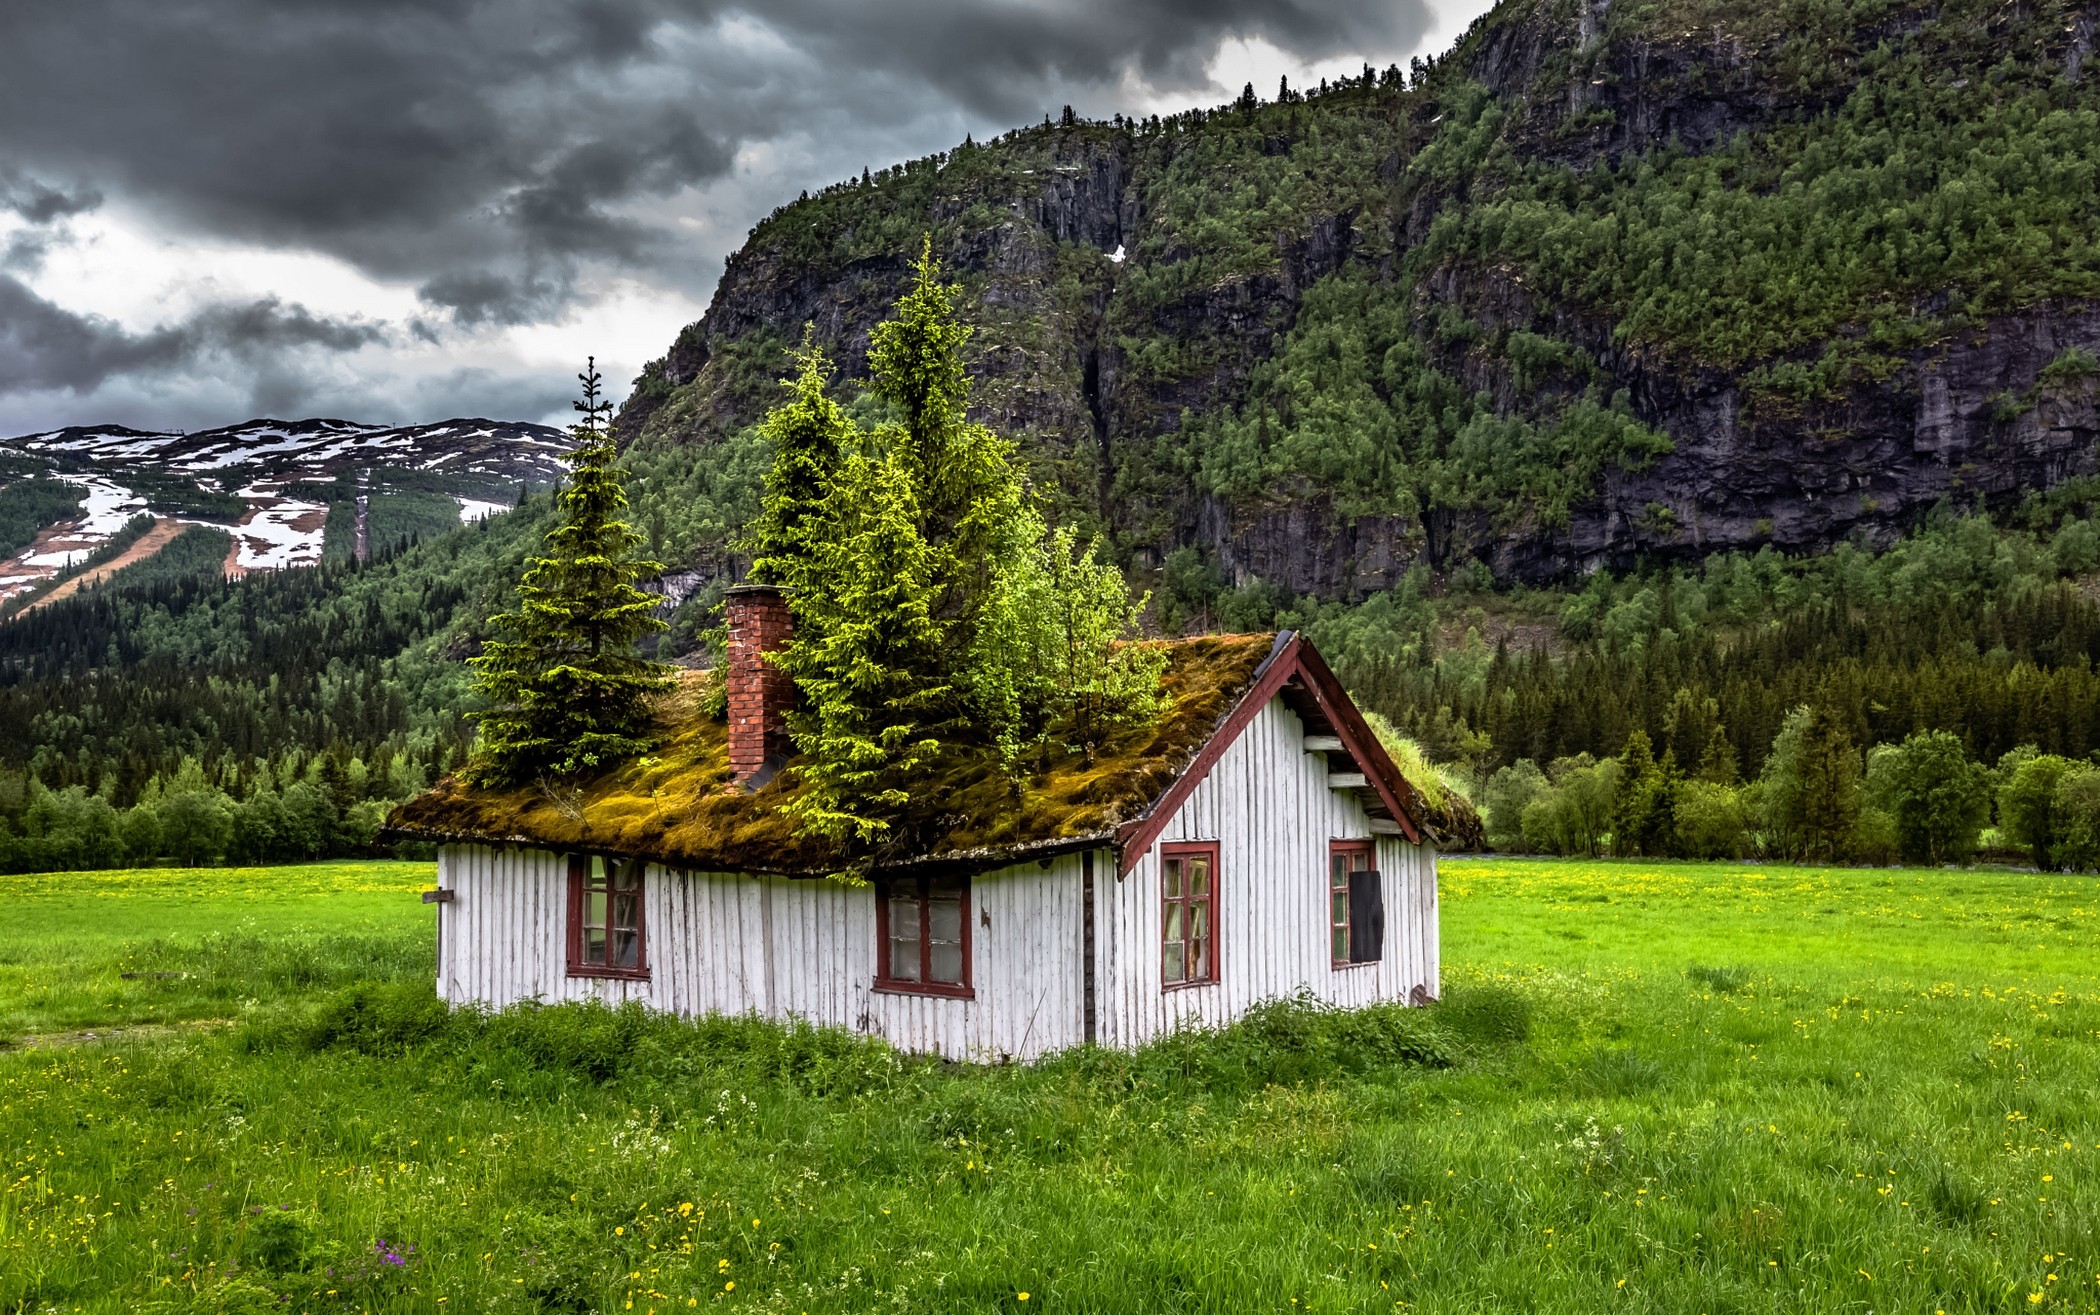 General 2100x1315 landscape nature summer abandoned Norway grass clouds mountains house trees green nordic landscapes ruins